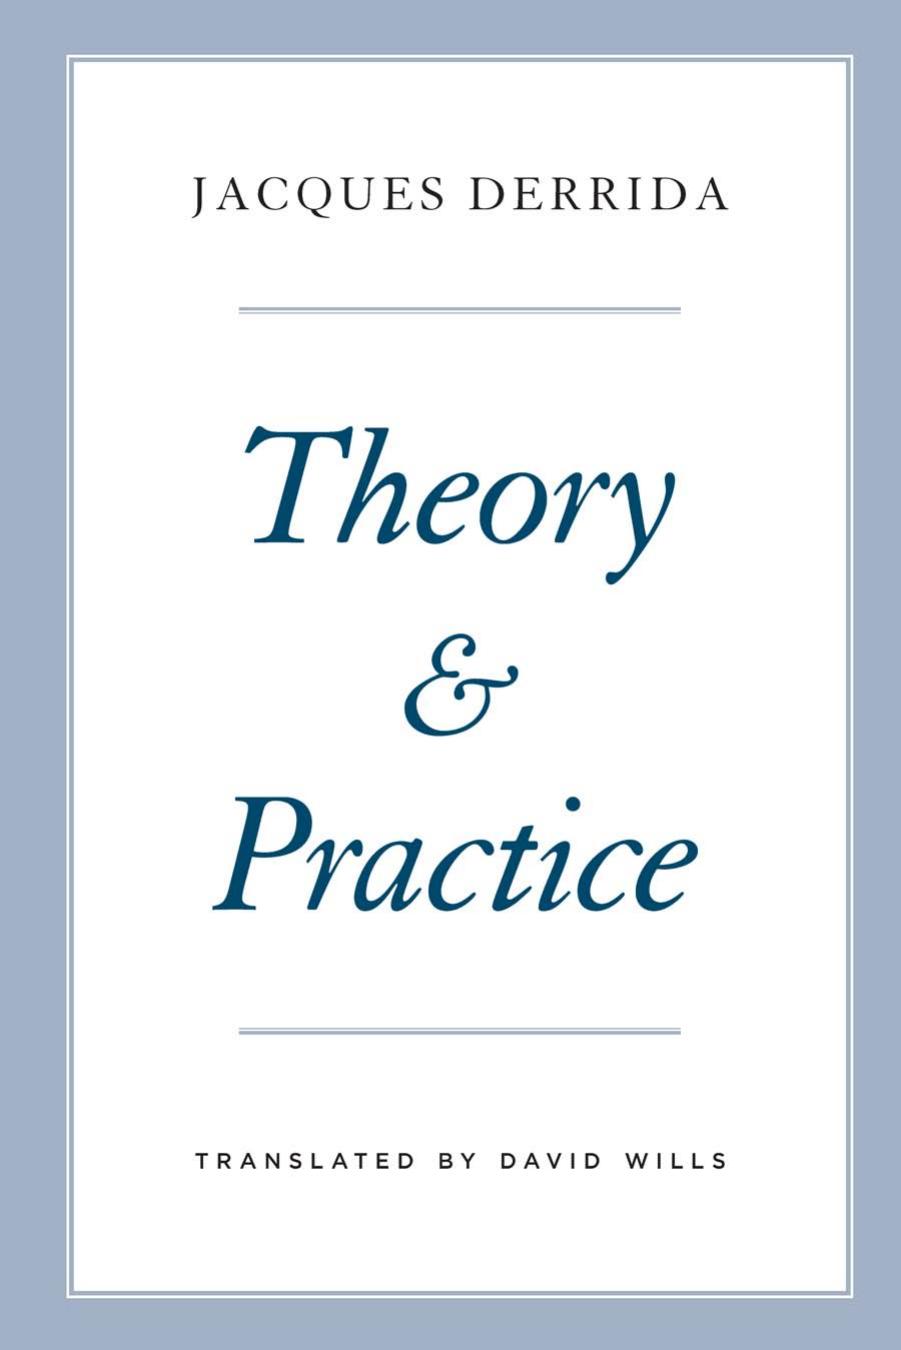 Theory and Practice